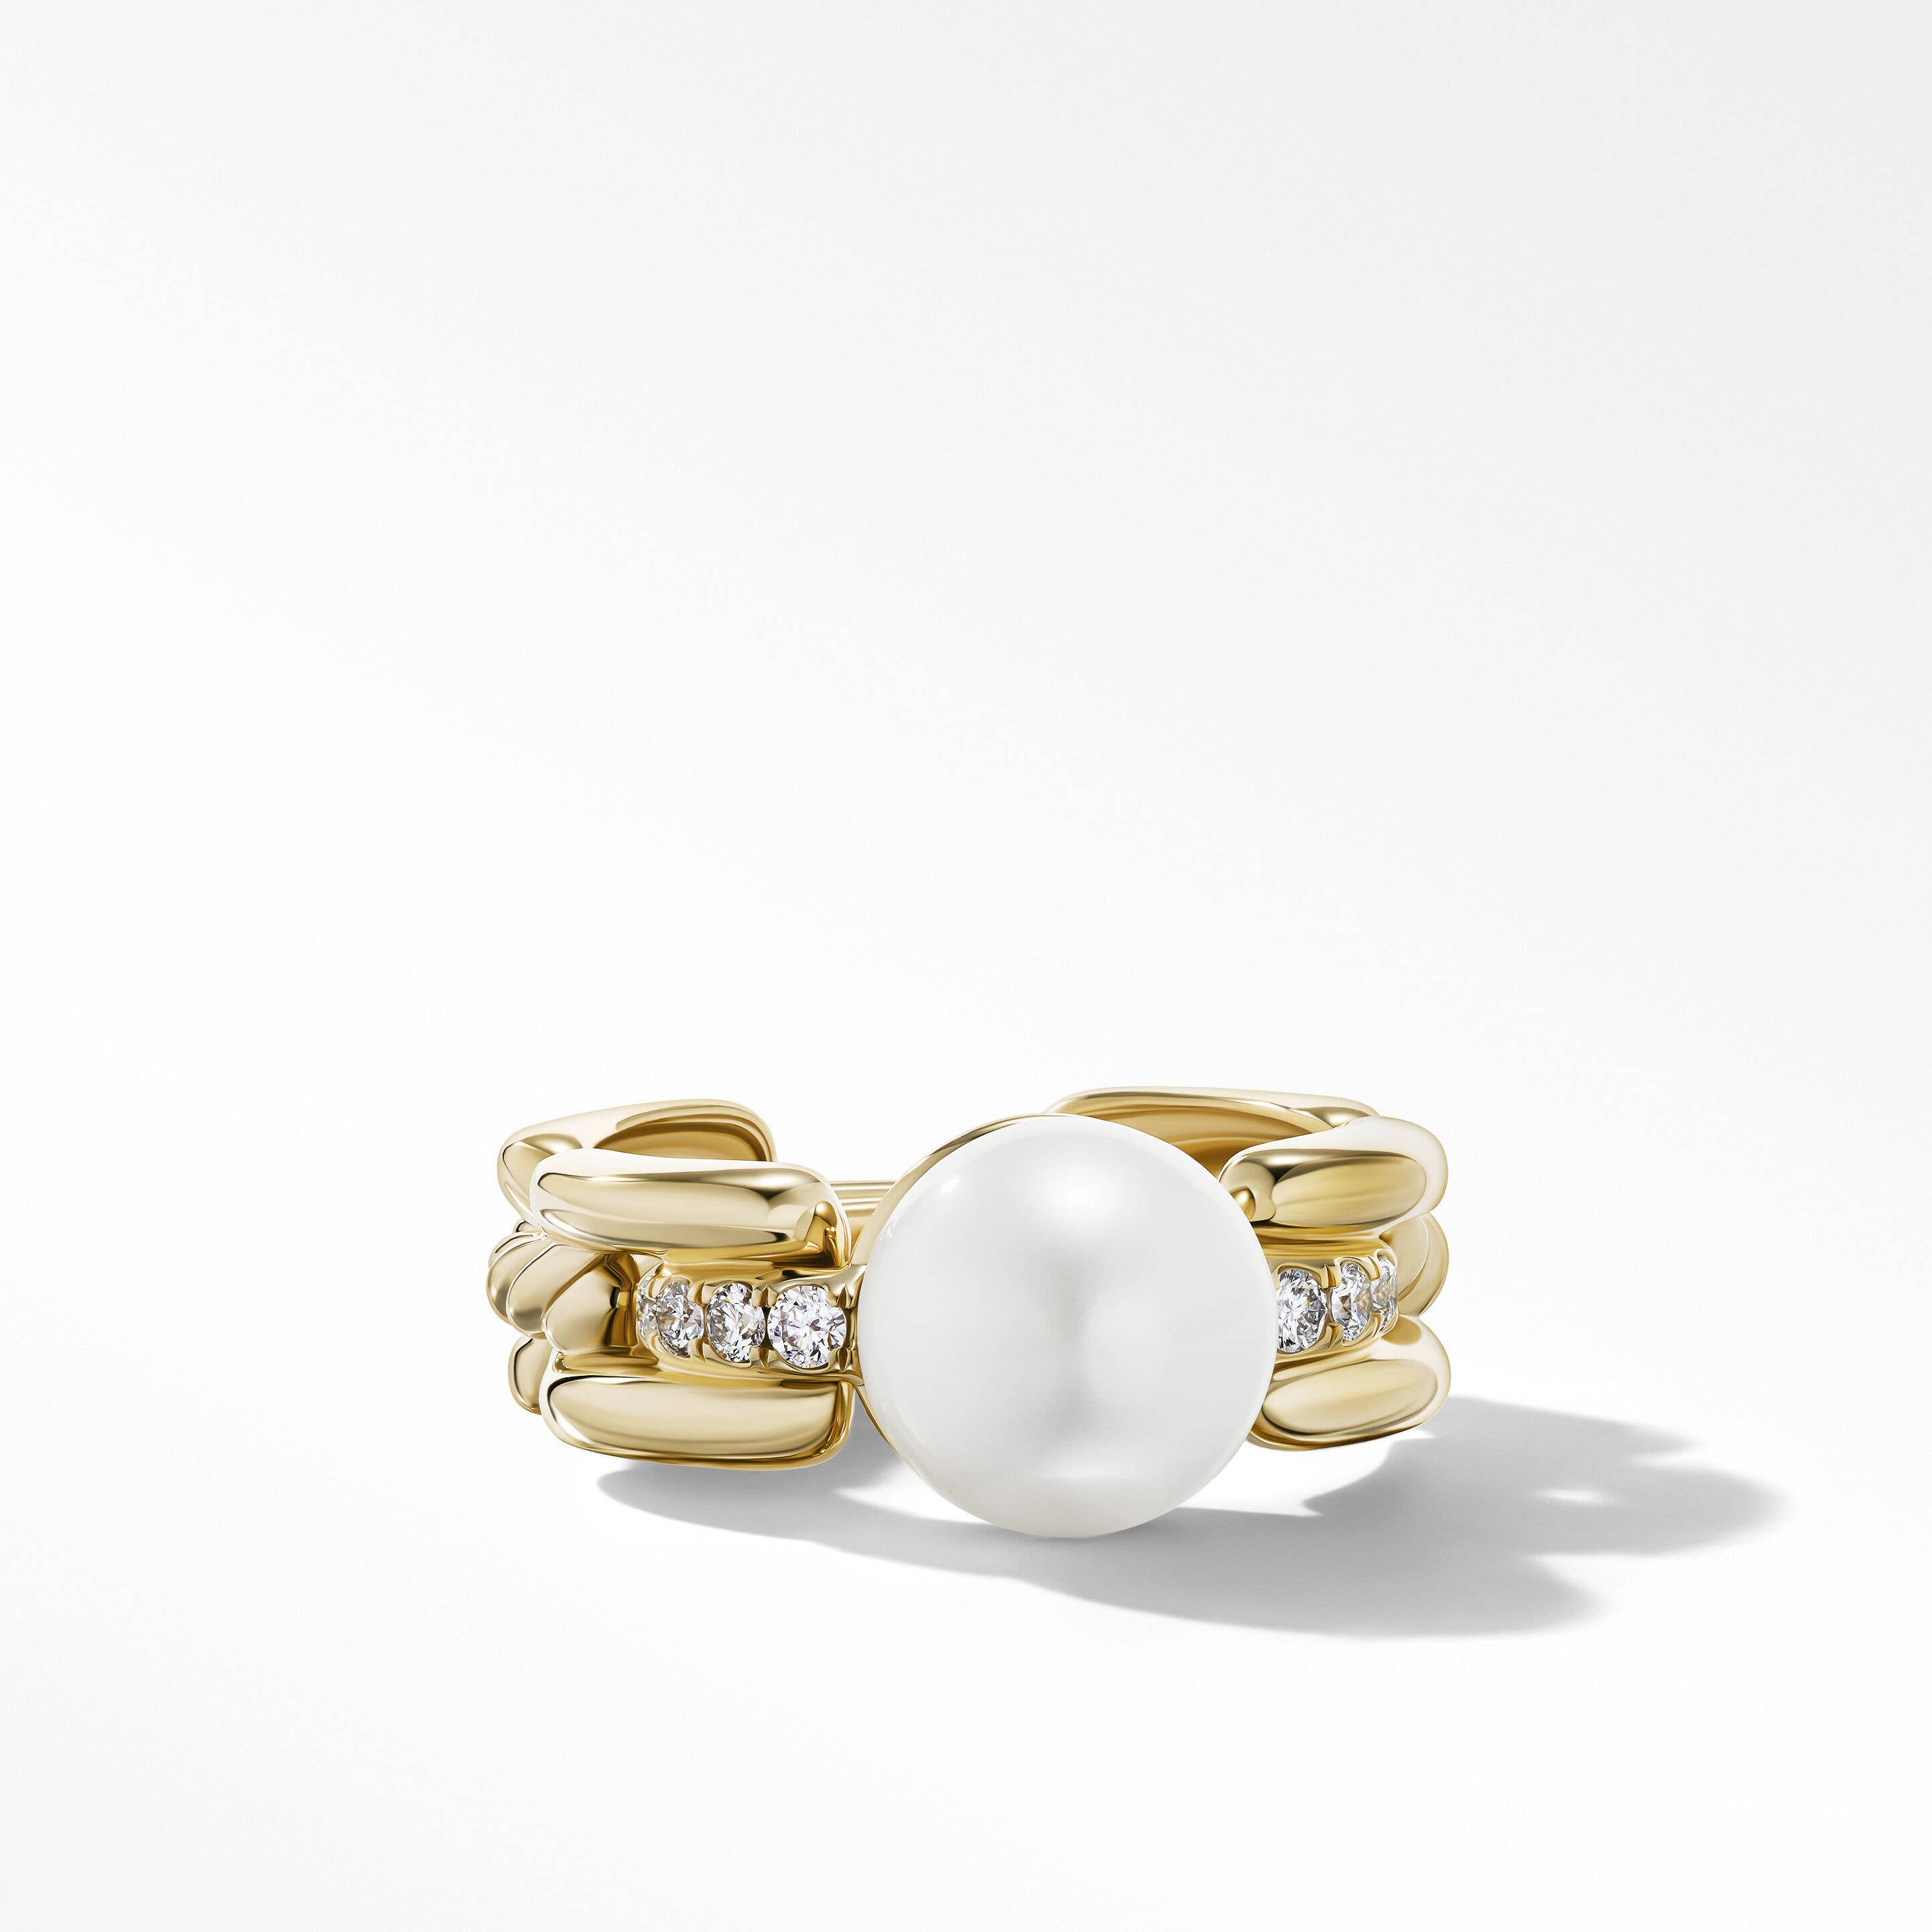 DY Madison Pearl Ring in 18K Yellow Gold with Diamonds, 7.5mm